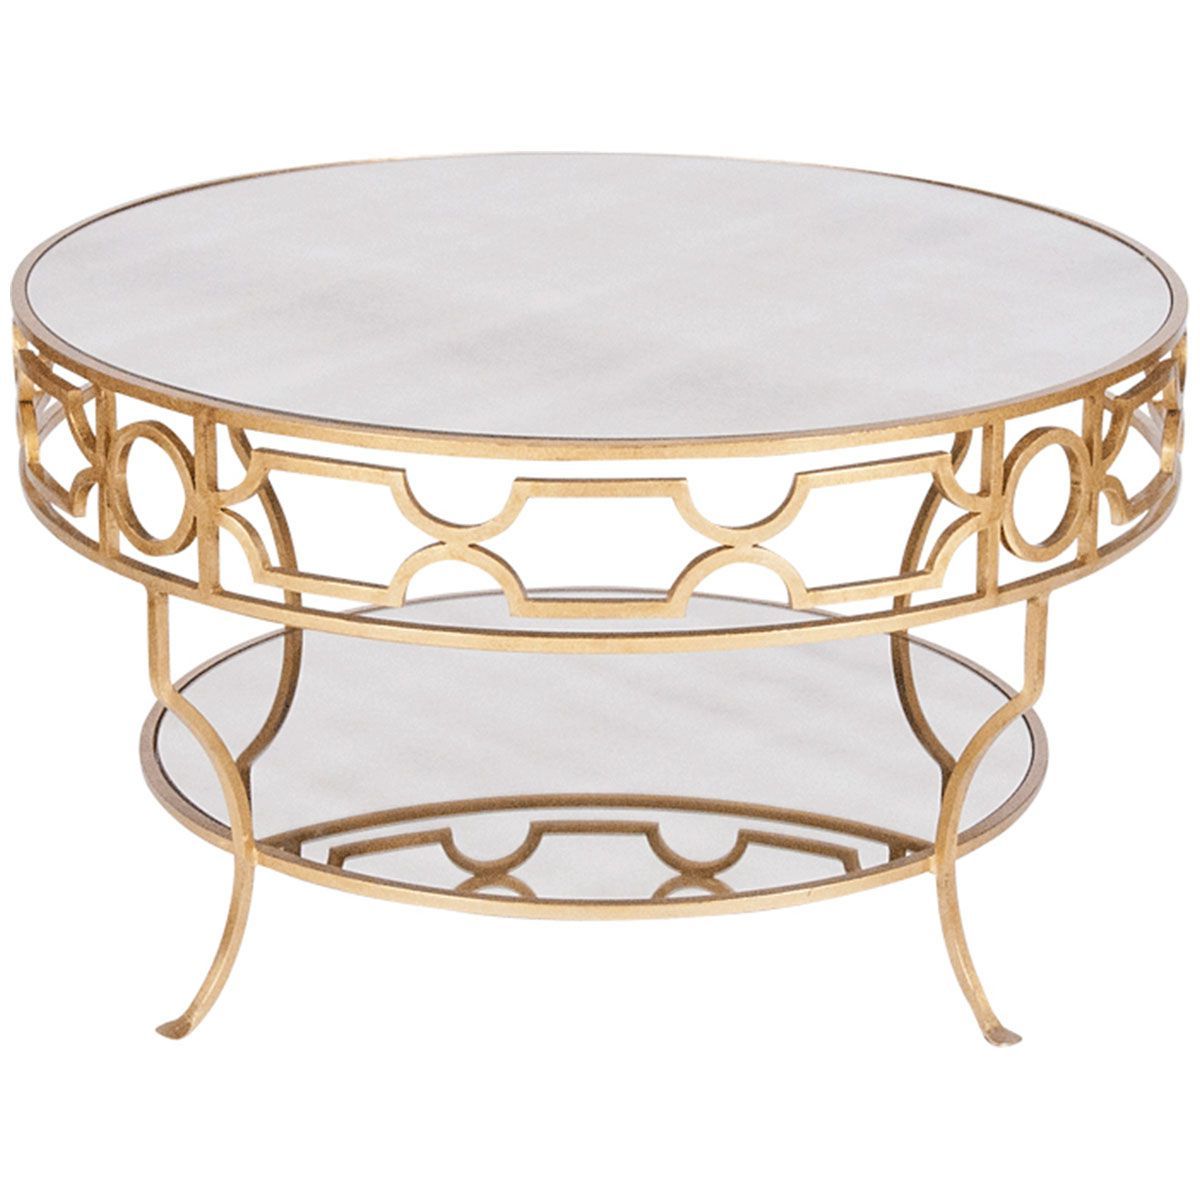 Leaf Round Coffee Tables For 2020 Worlds Away Two Tier Round Gold Leaf Coffee Table With Plain Mirror (View 8 of 10)